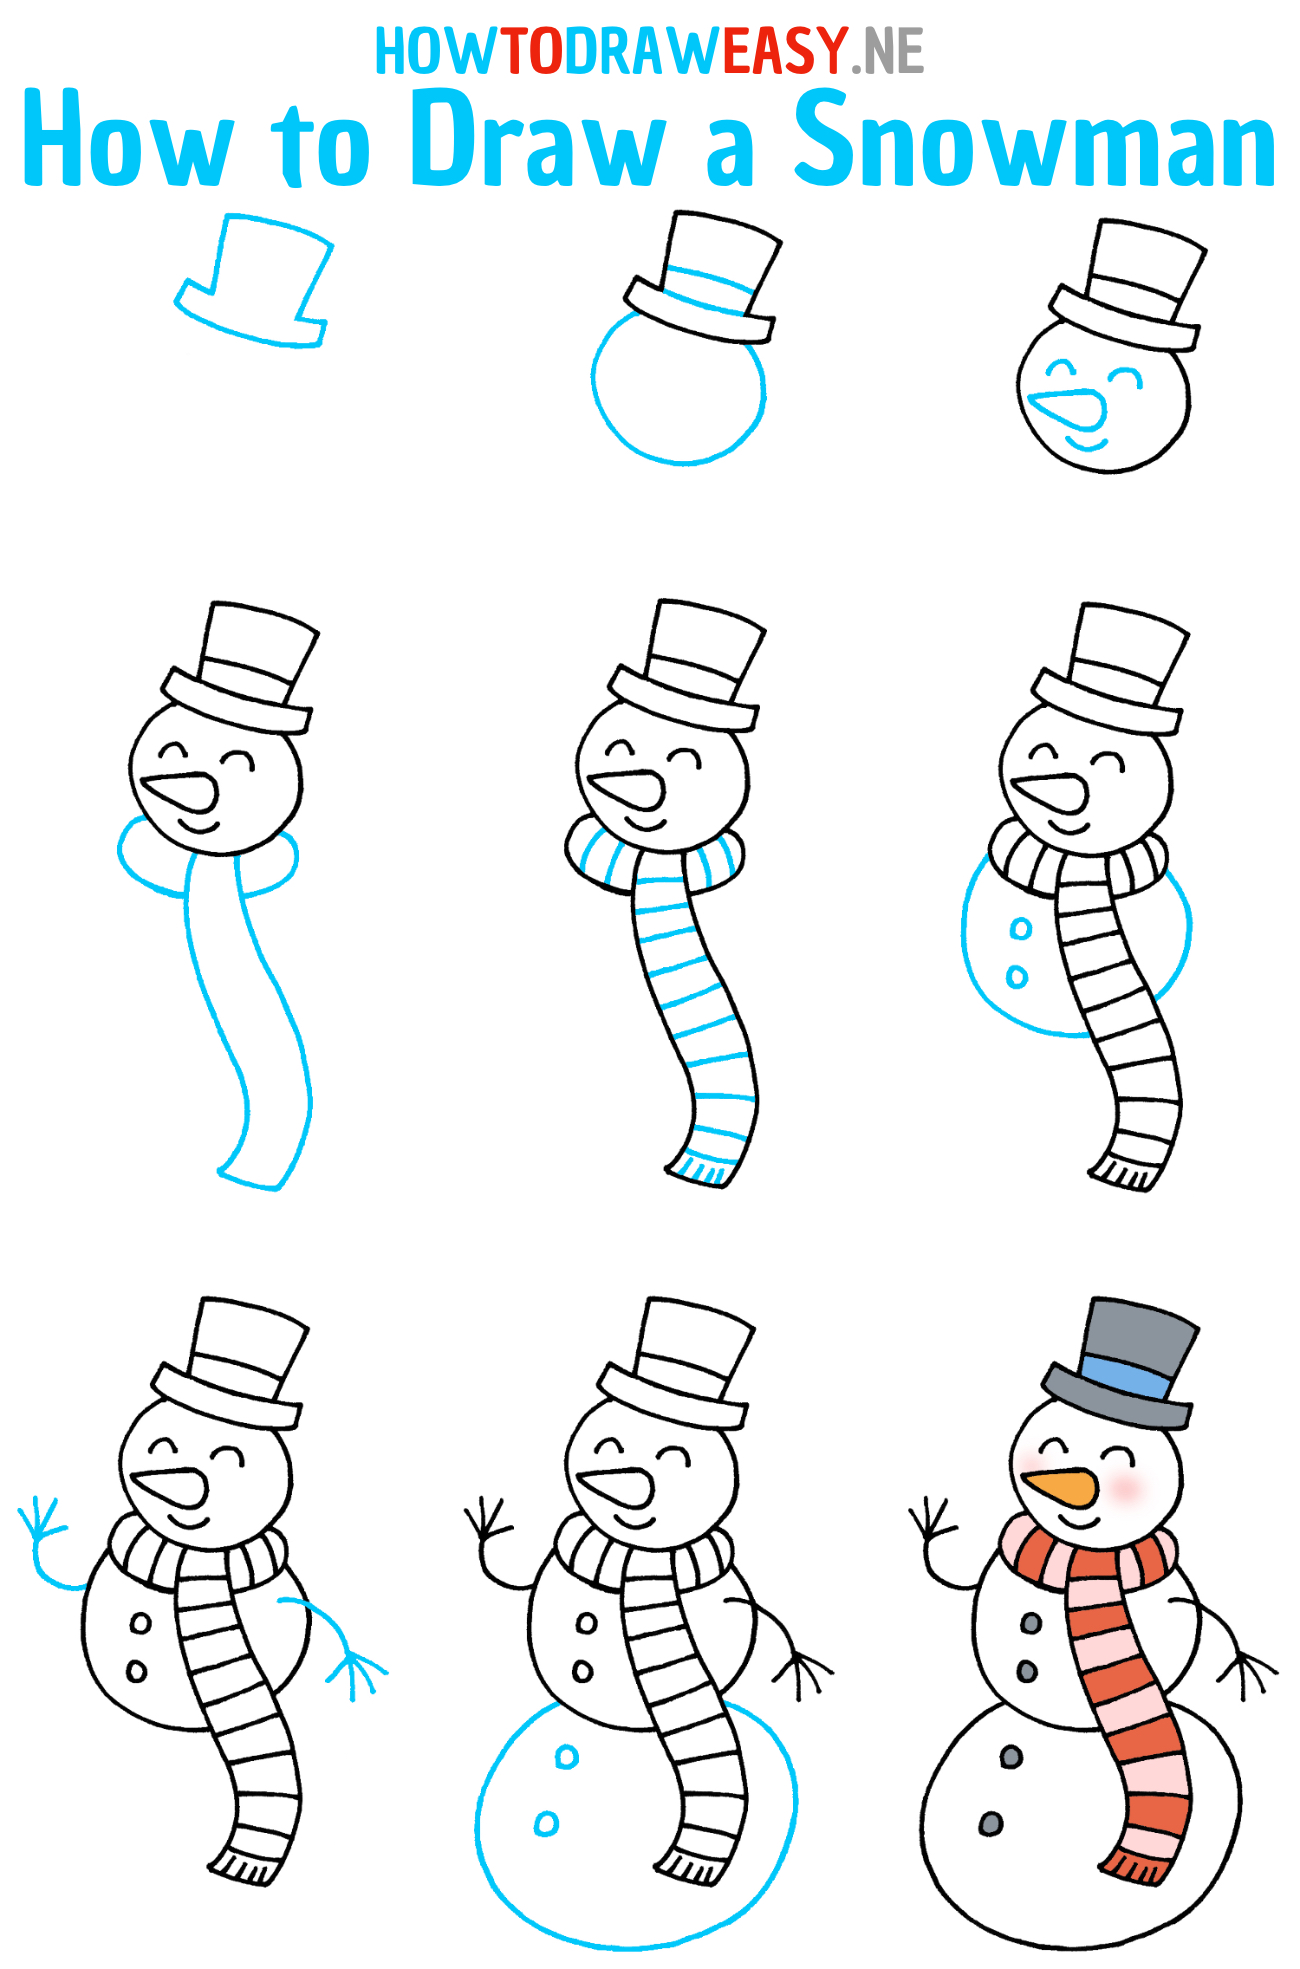 How to Draw a Snowman Step by Step